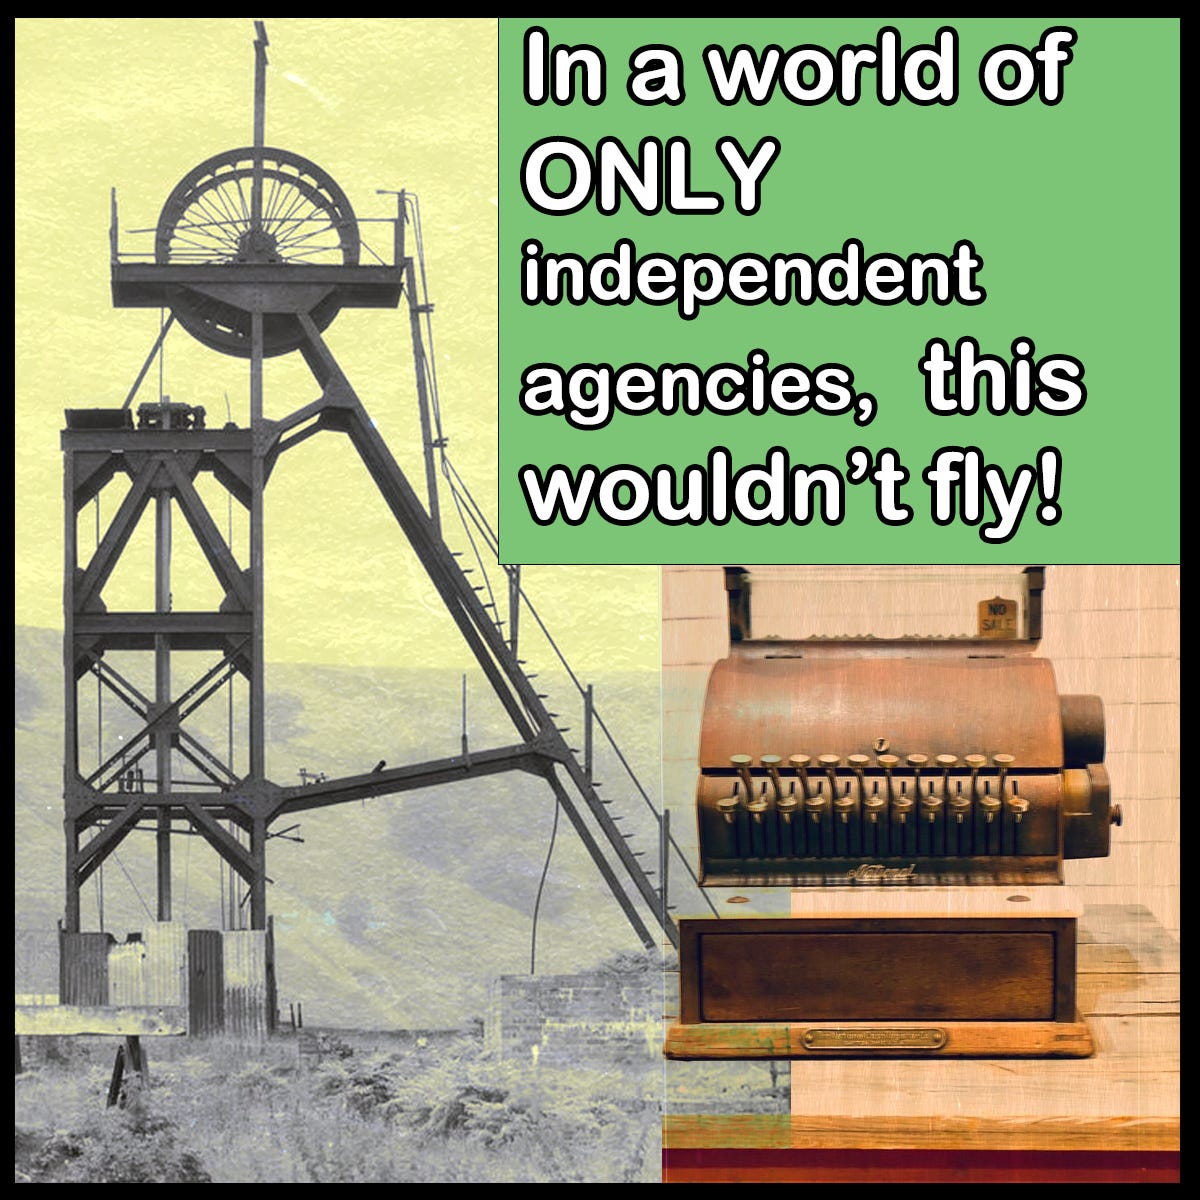 A graphic of an industrial mill, and a typewriter, with a title that reads ‘In a world of ONLY independent agencies, this wouldn’t fly!’